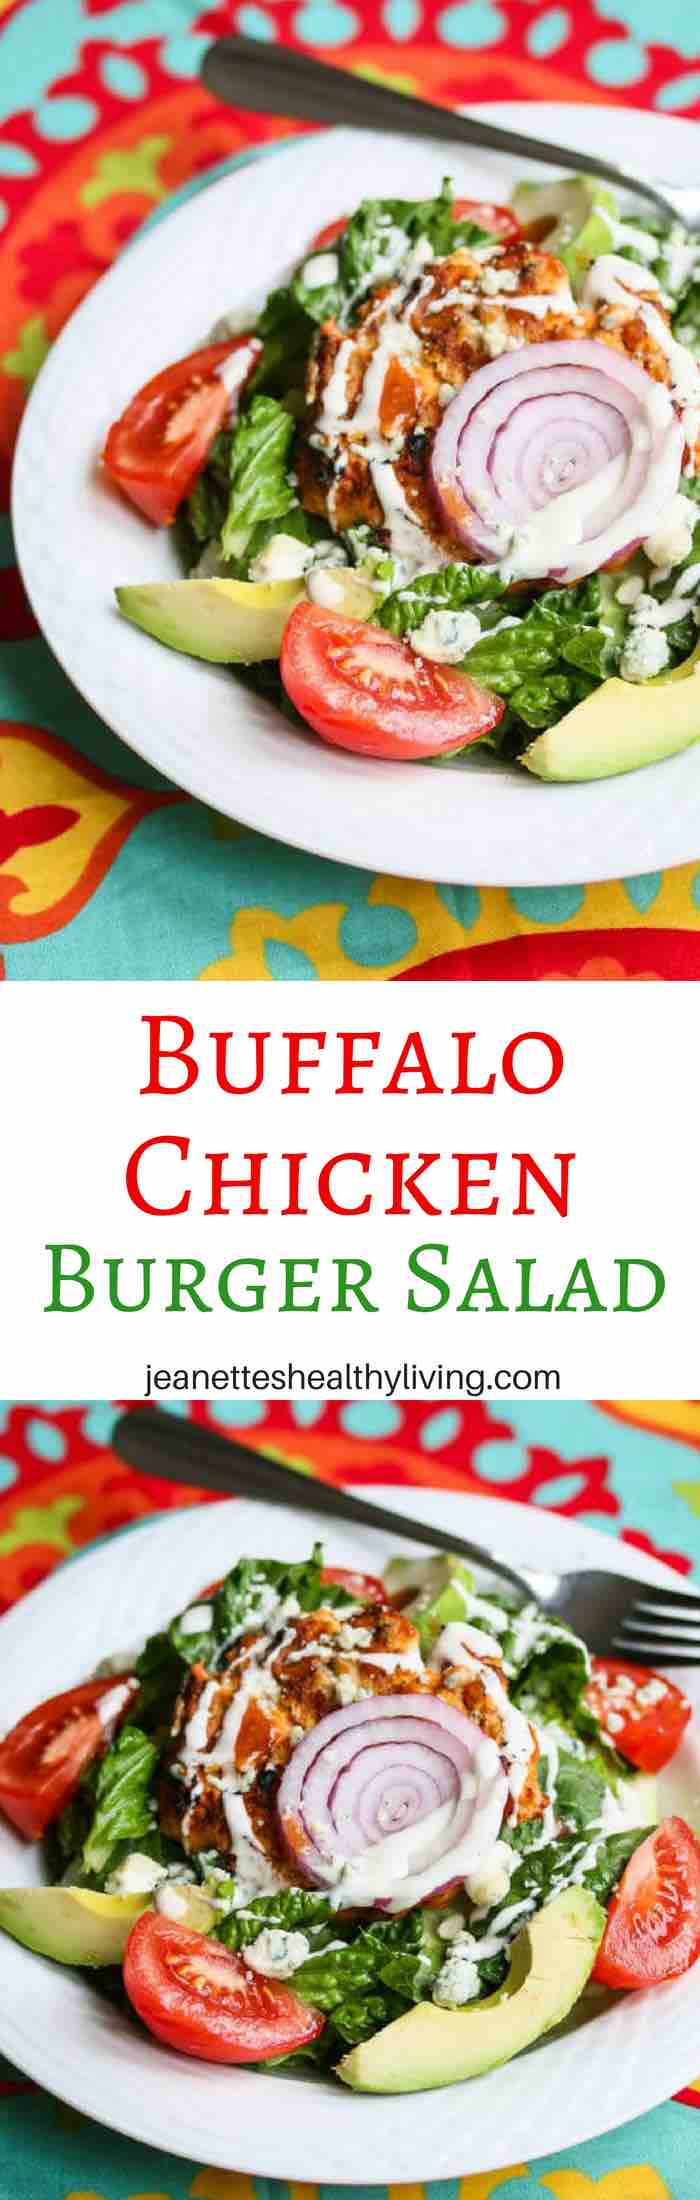 Buffalo Chicken Burger Salad Recipe - simple, delicious and great when you're craving Buffalo chicken but want to keep lunch or dinner light.